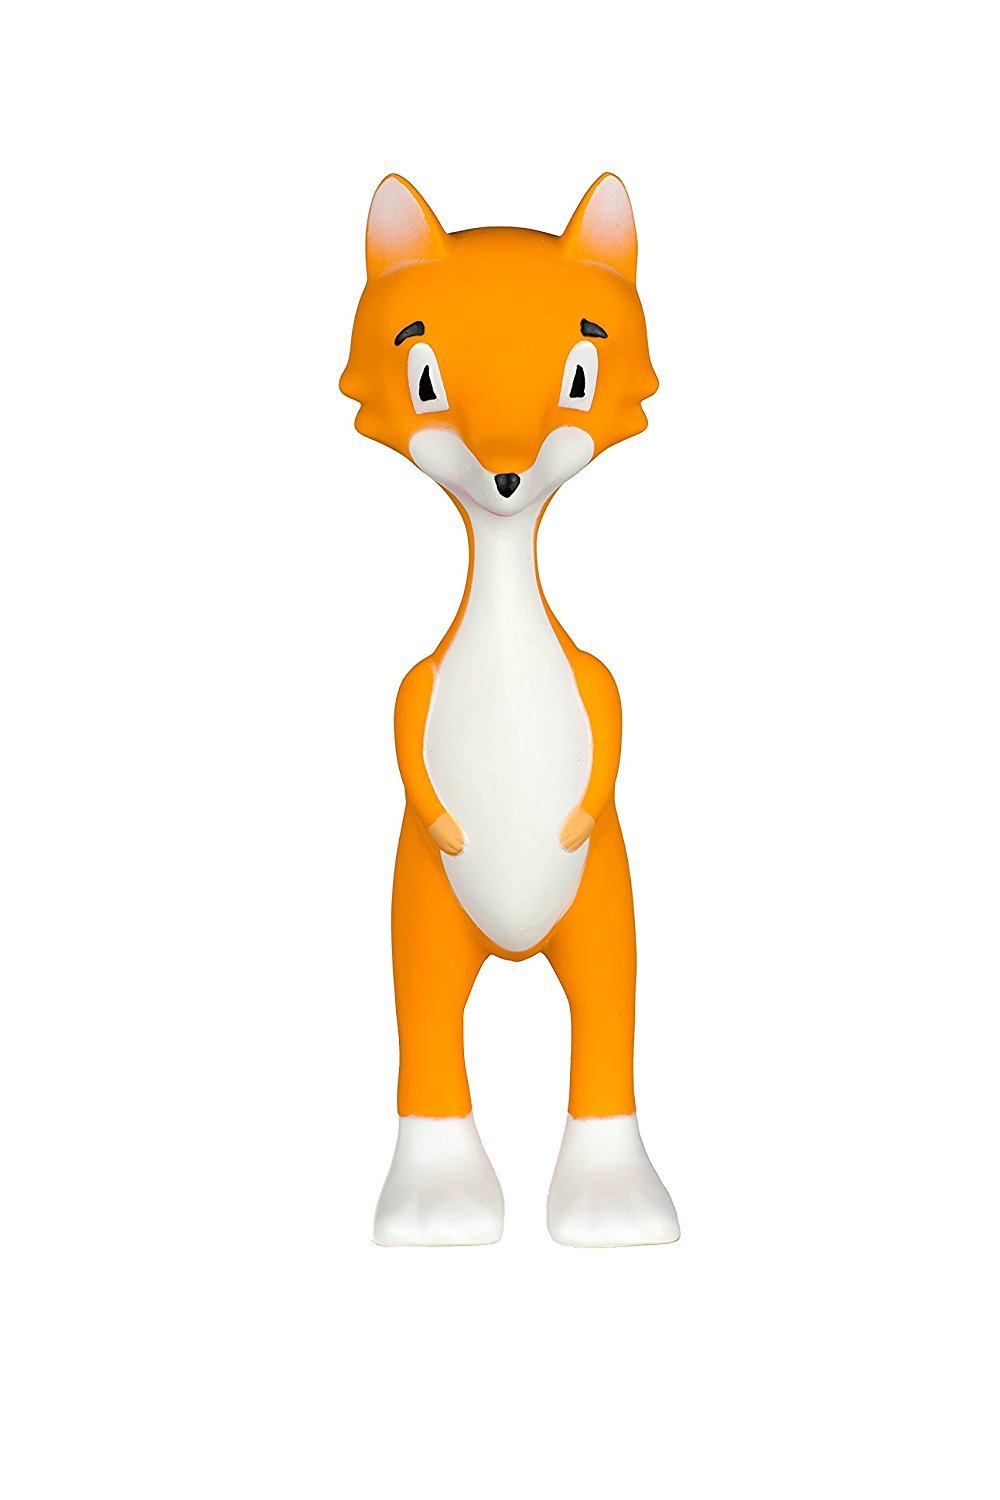 Ethan the Fox Teething Toy | Earthlets.com